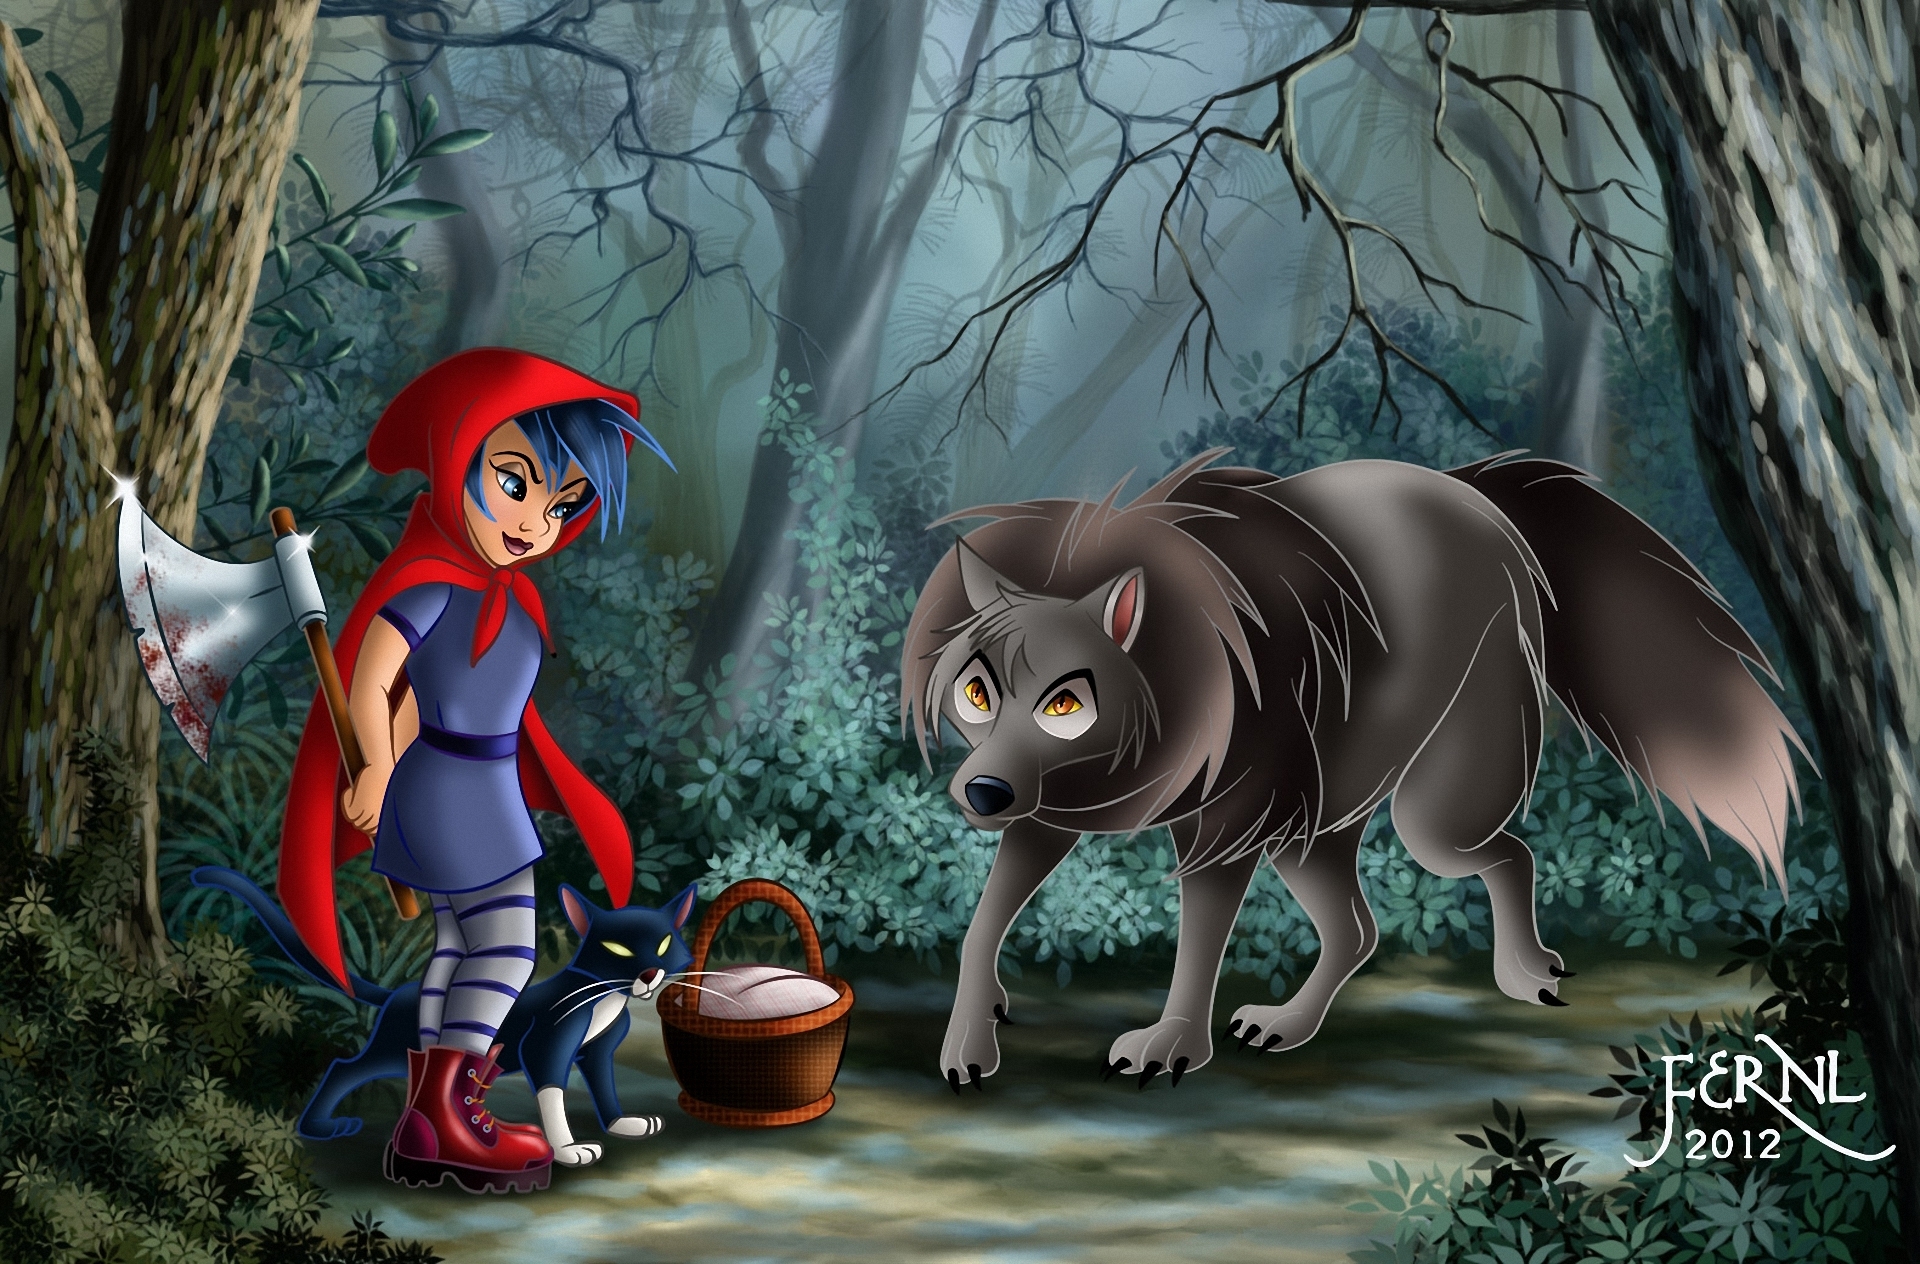 art, Red, Riding, Hood, The, Wolf, The, Ax, The, Cat, Krzina Wallpaper